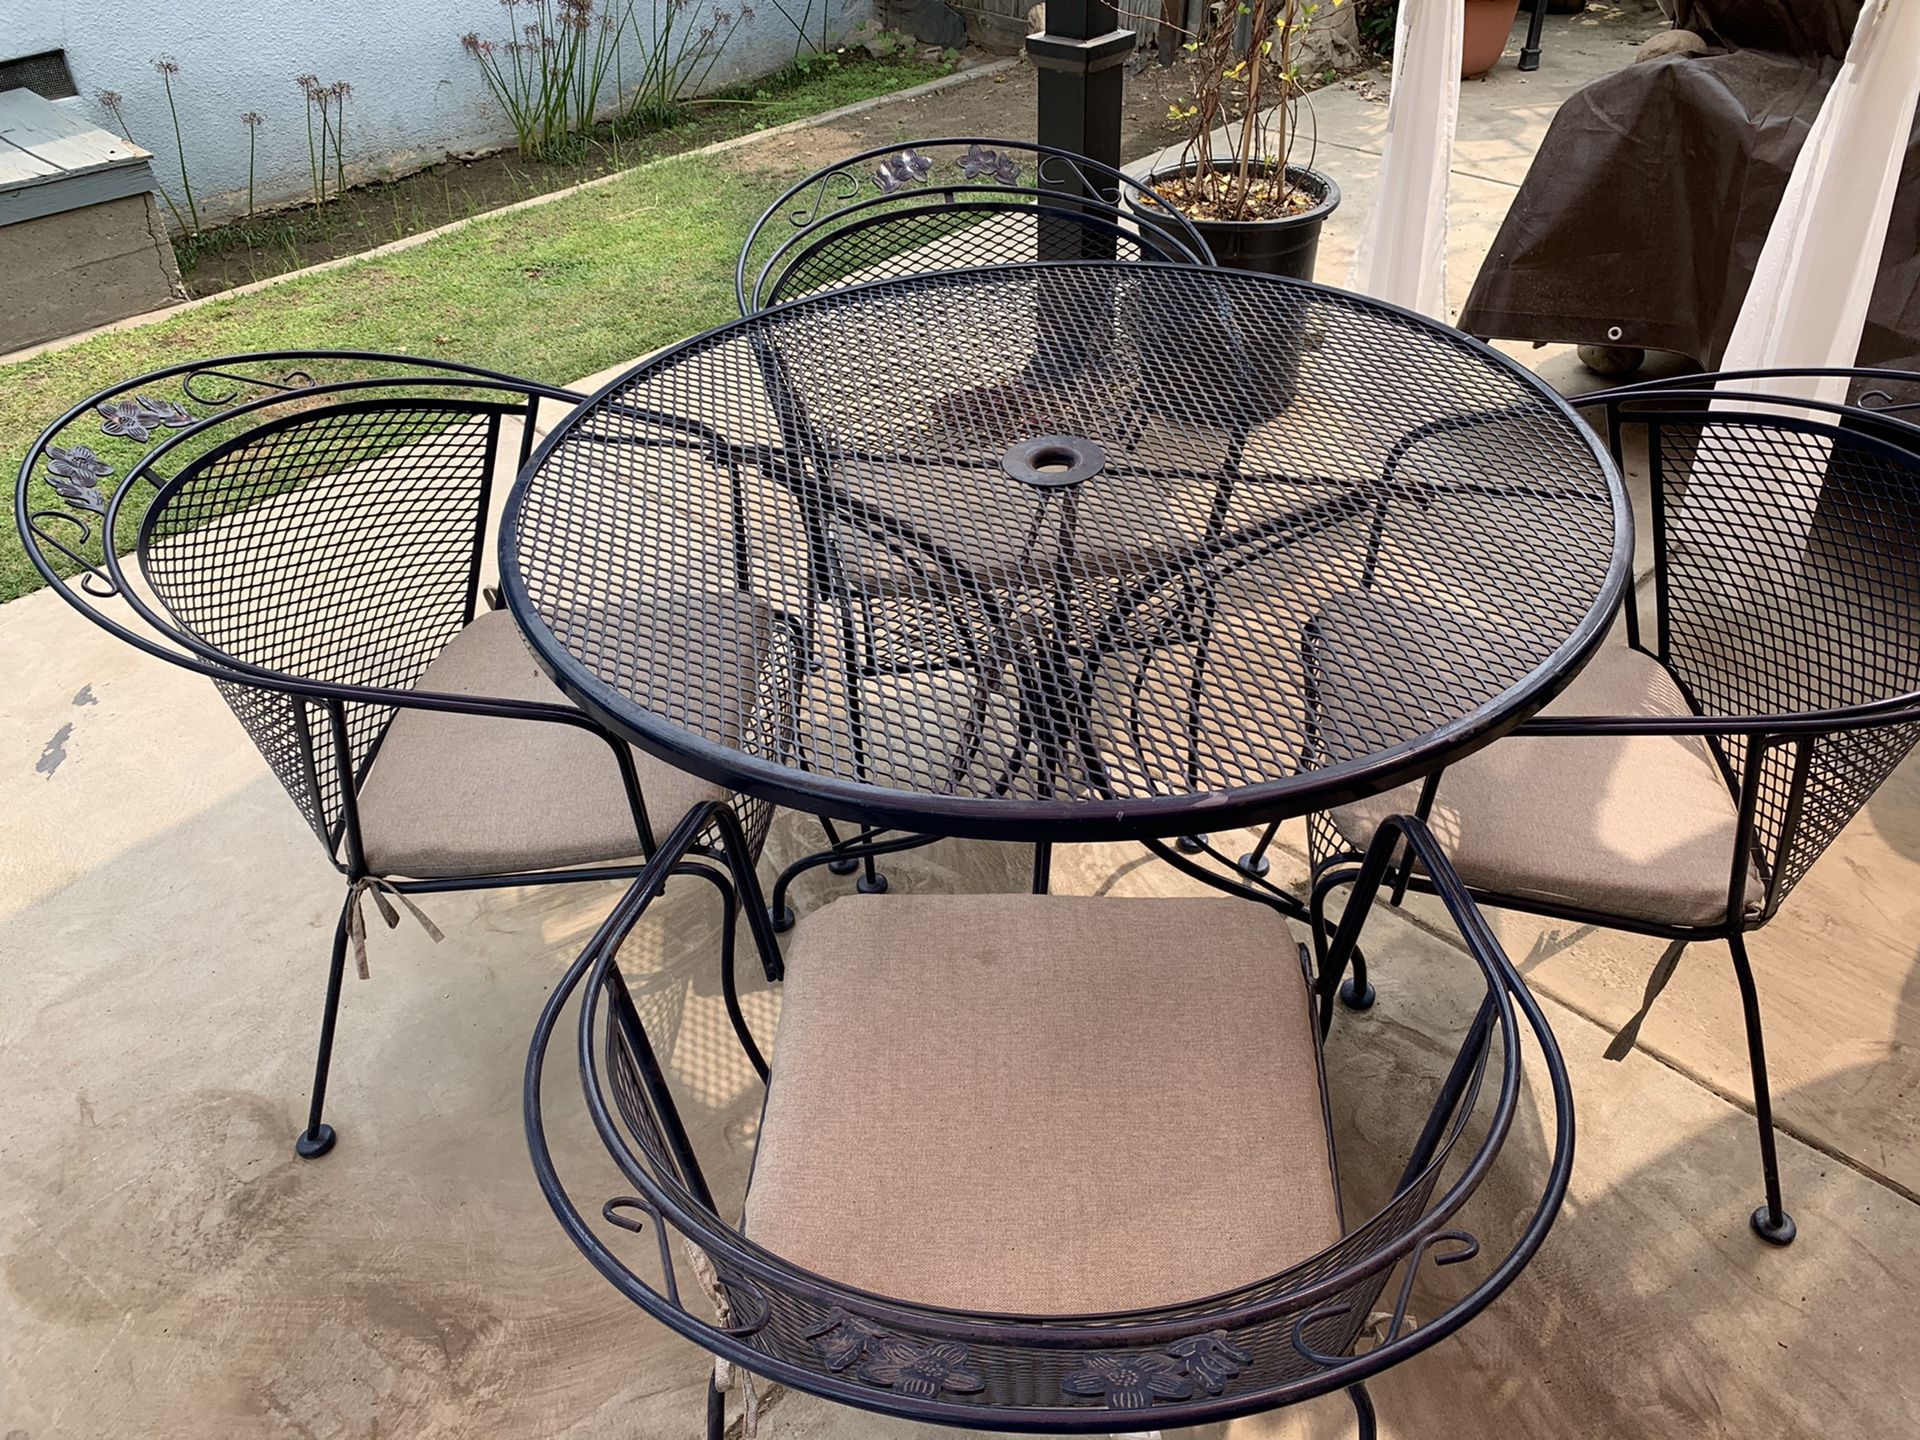 BEAUTIFUL HEAVY METAL PATIO SET ($350 FIRM) EXCELLENT CONDITION